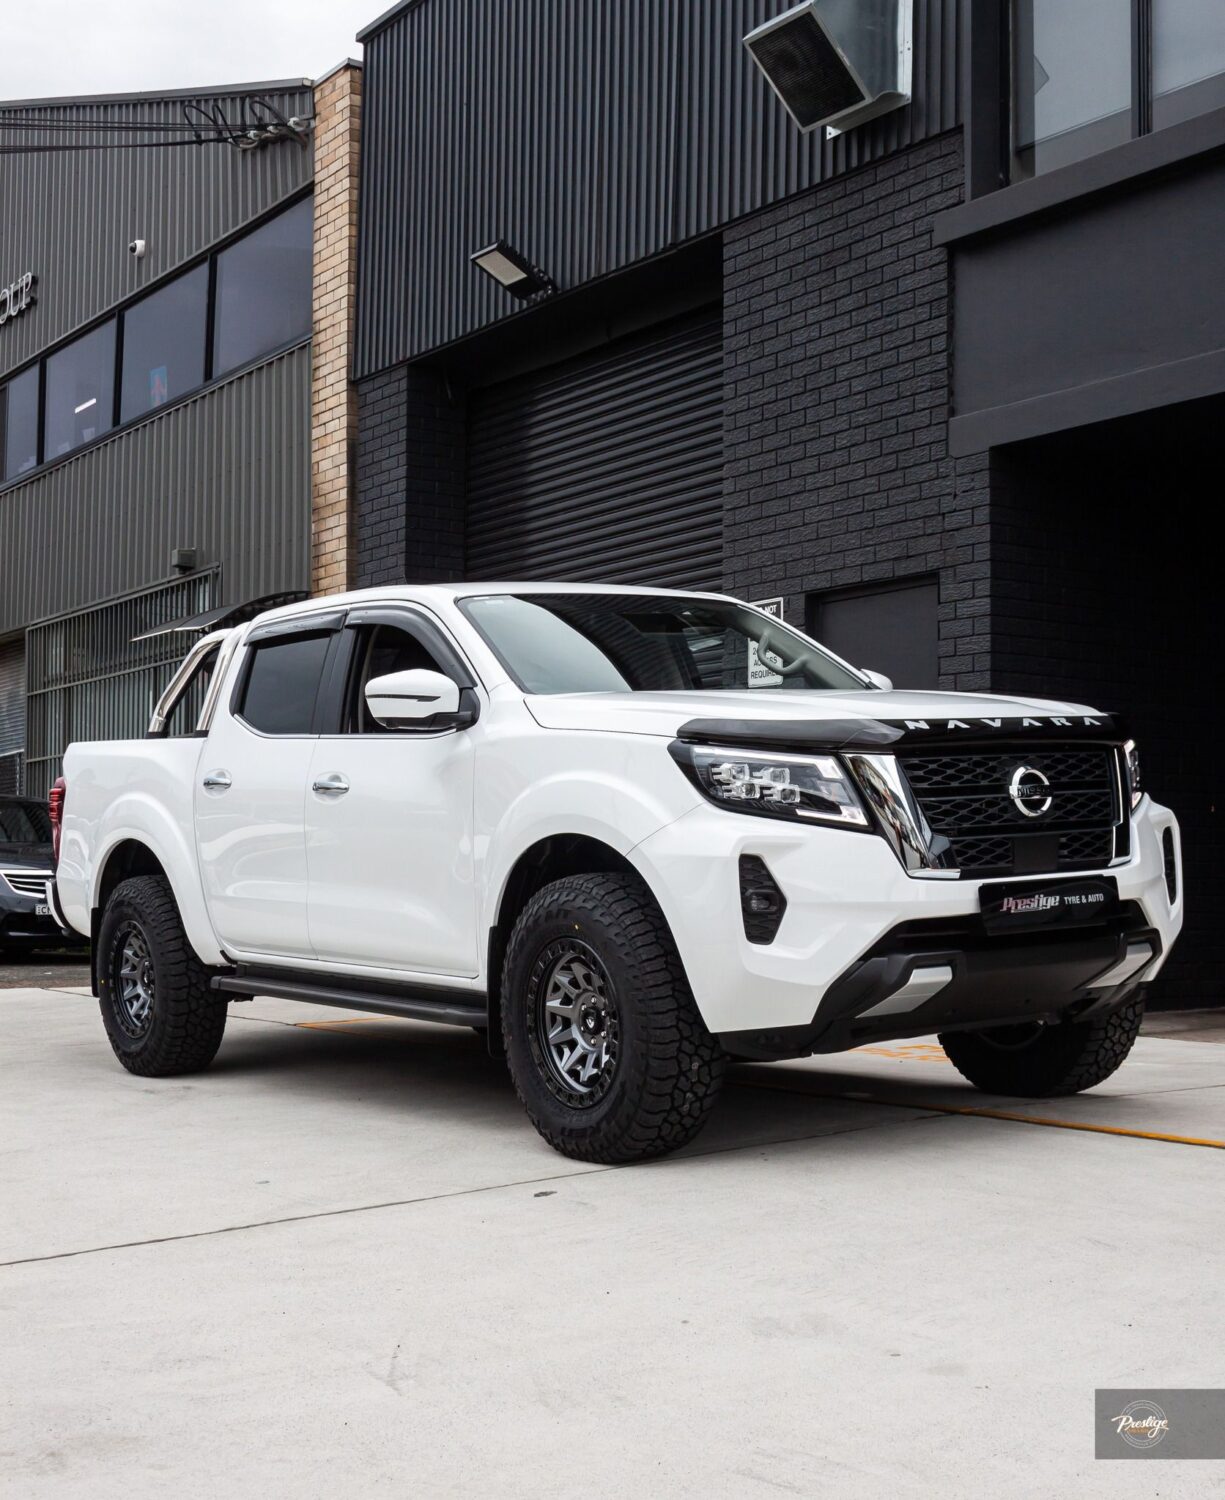 Nissan Navara D23 with 17×8.5-inch Fuel Off-Road Covert D716